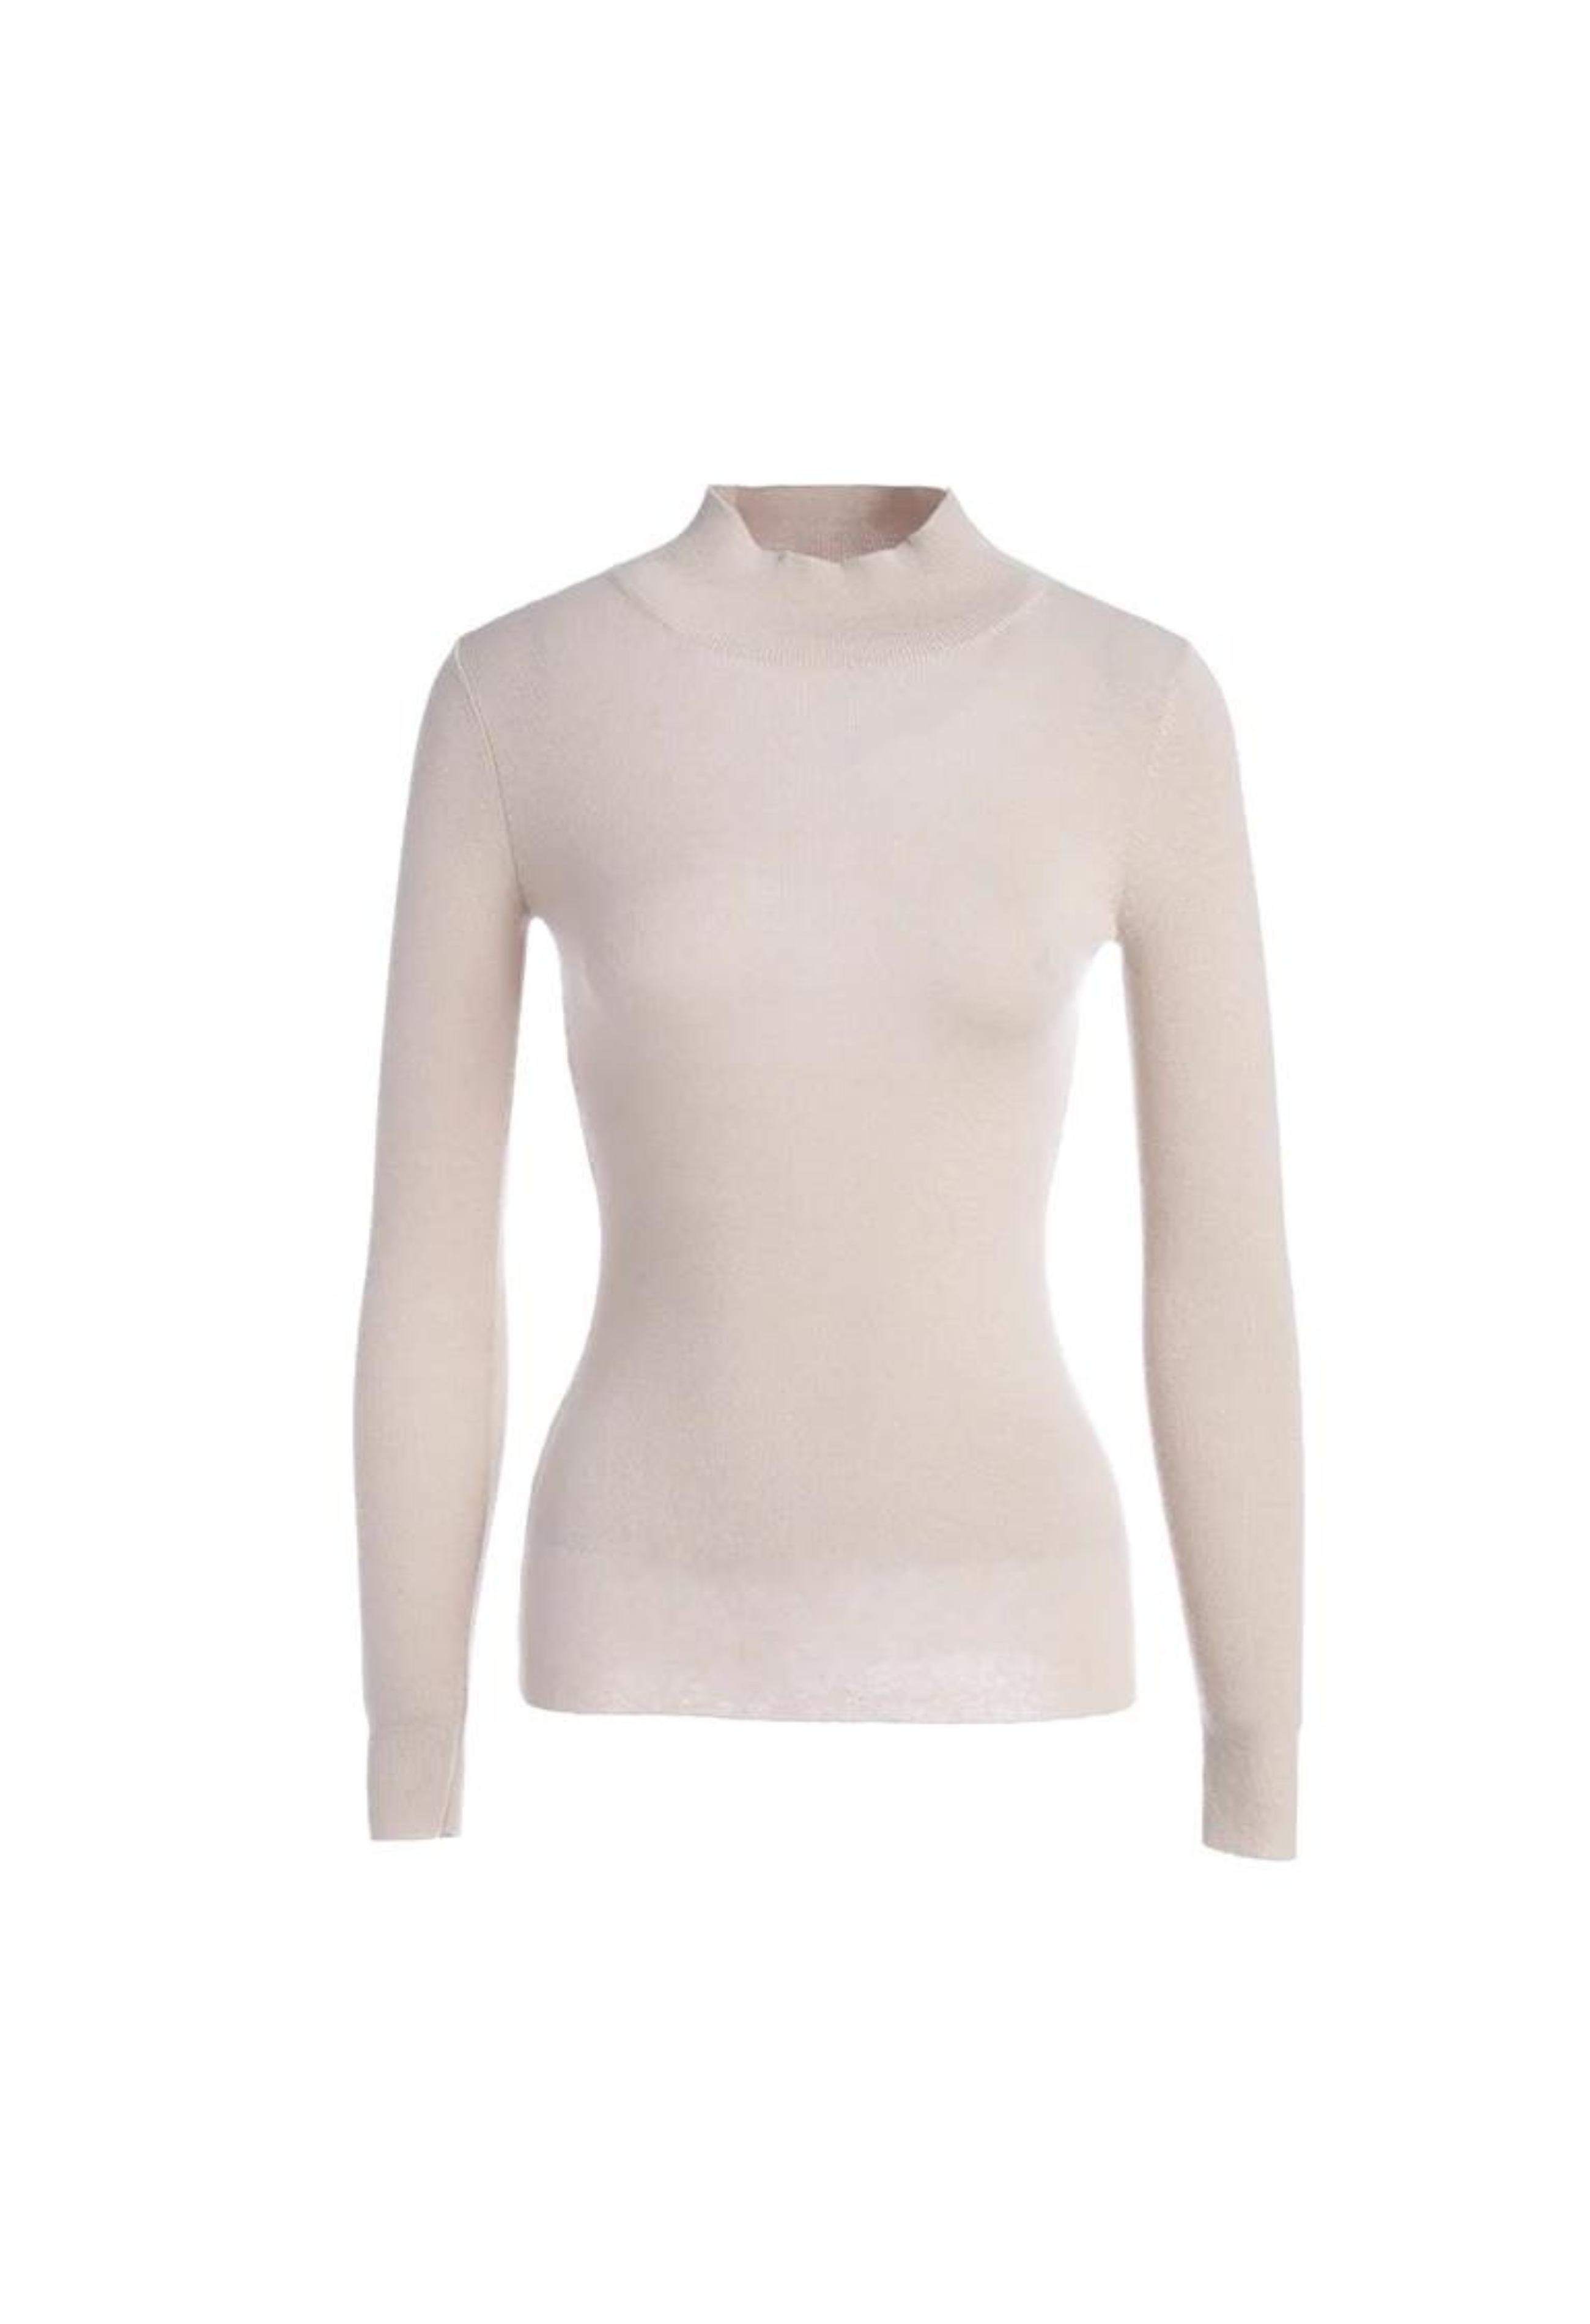 Fitted Mock-Neck Sweater (White Worsted Cashmere Staple)